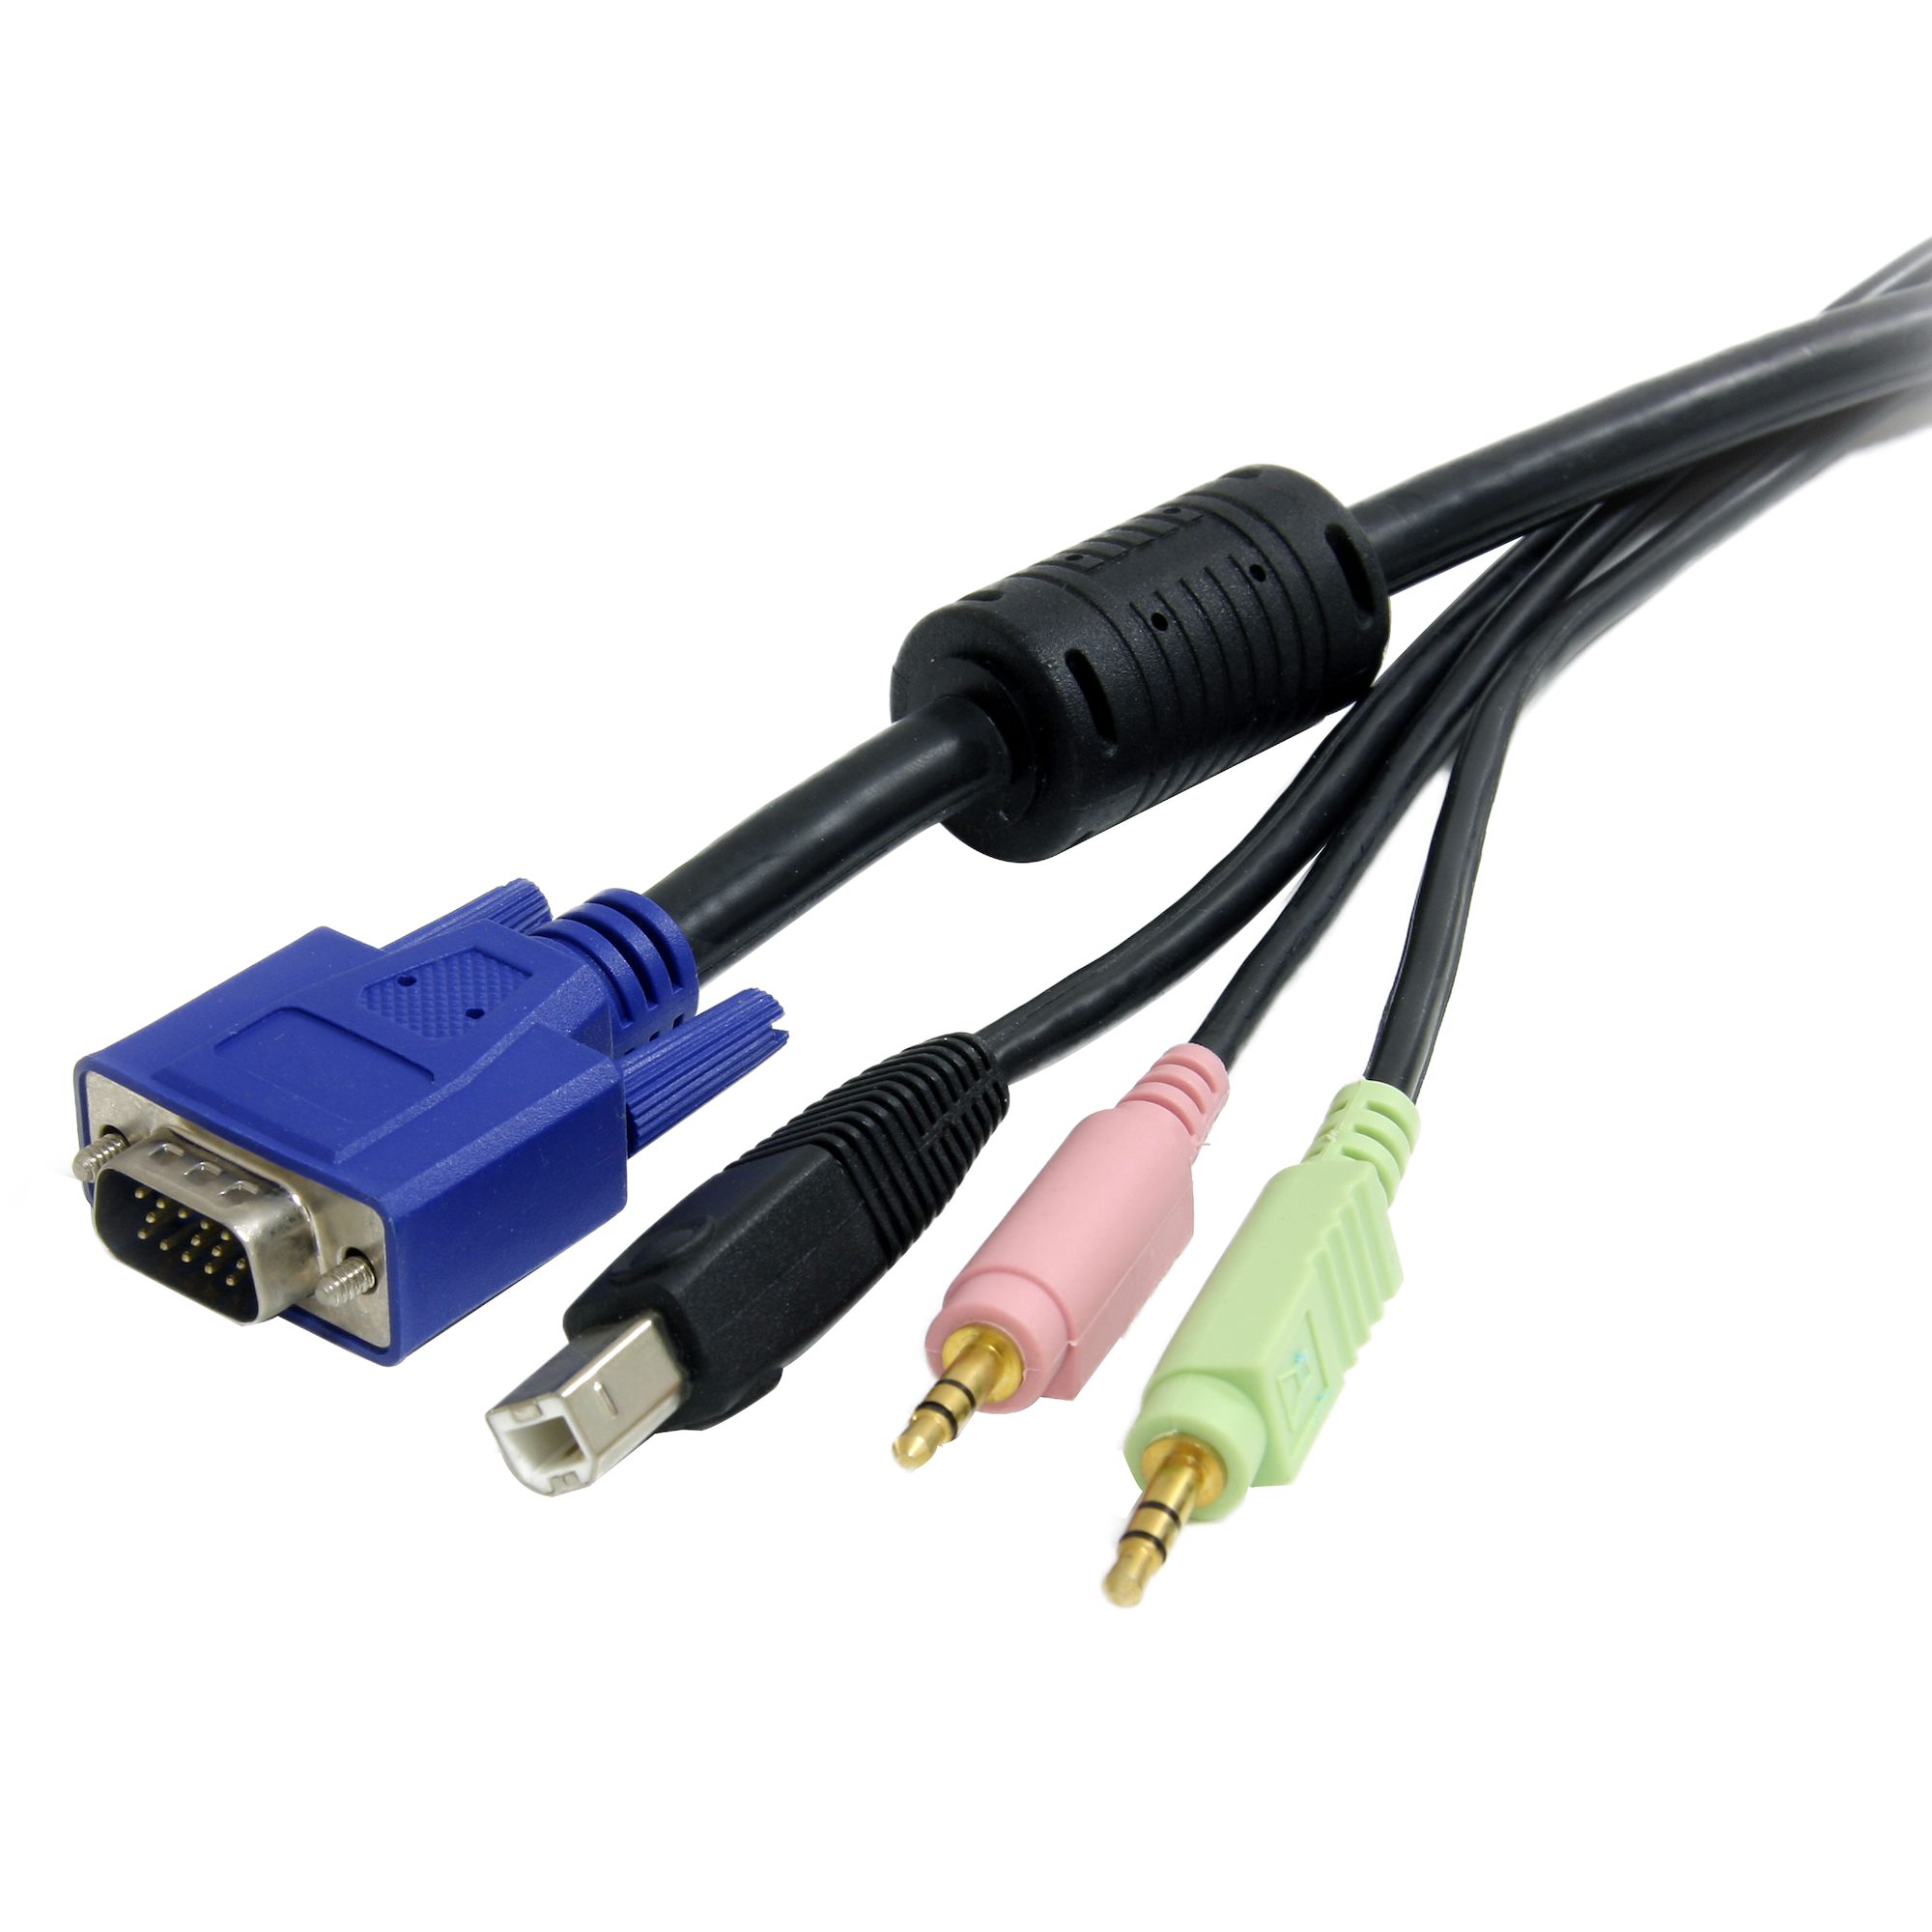 6ft 2m StarTech.com 4-in-1 Cable for KVMs with Dual Link DVI and USB Audio & Microphone Cables Built-in DVID4N1USB6 